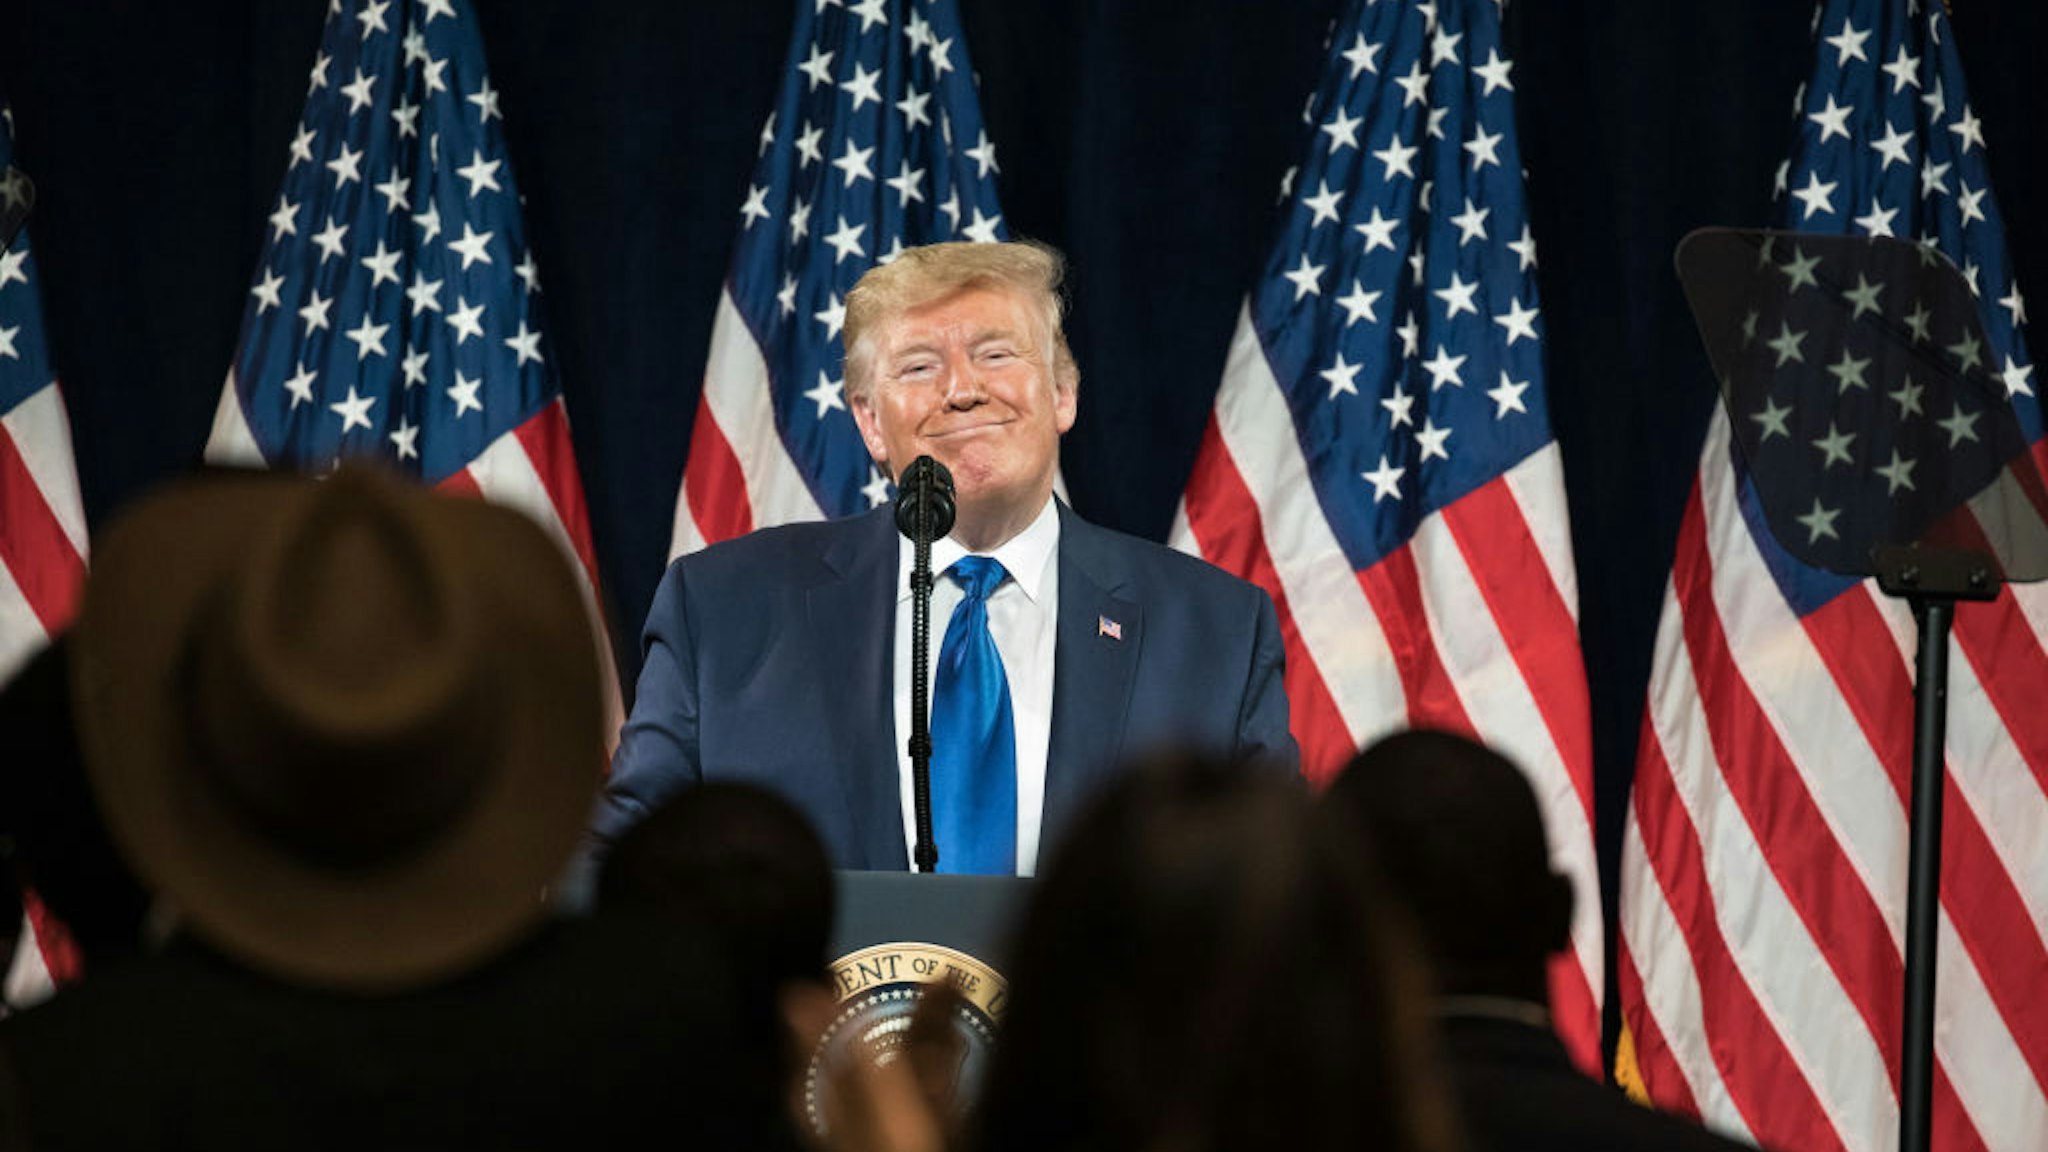 U.S. President Donald Trump pauses while speaking during the 'Black Voices for Trump' launch event in Atlanta, Georgia, U.S., on Friday, Nov. 8, 2019. Monday, January 20, 2020, marks the third anniversary of U.S. President Donald Trump's inauguration. Our editors select the best archive images looking back over Trump’s term in office. Photographer: Dustin Chambers/Bloomberg